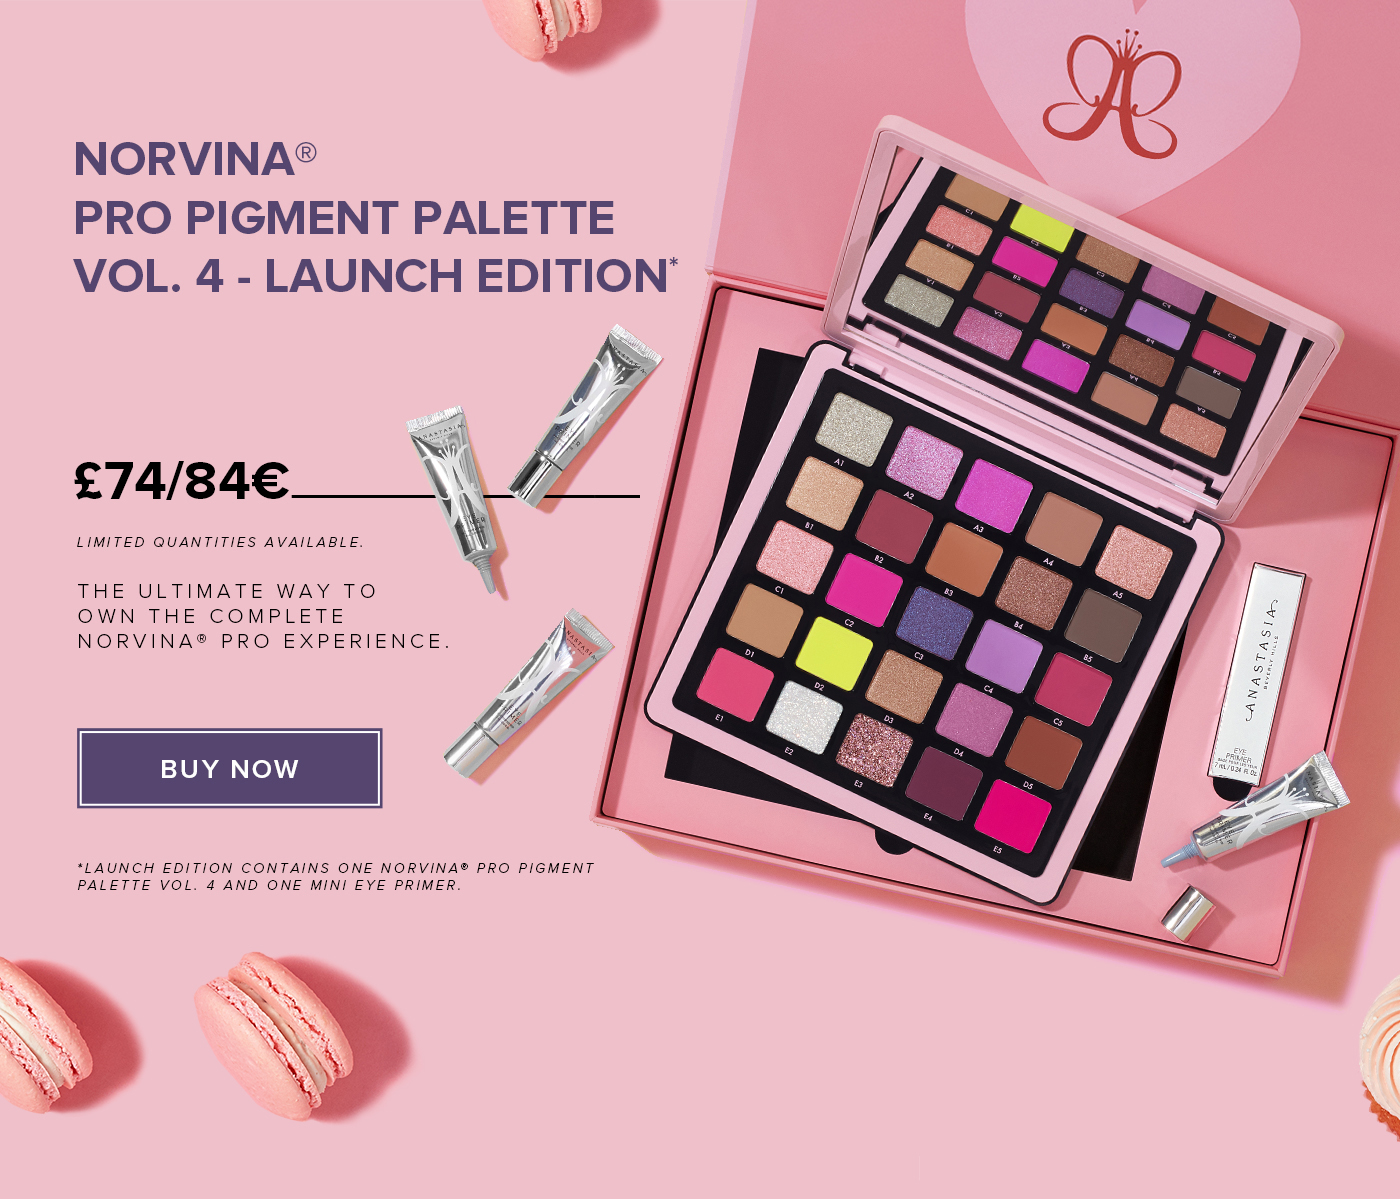 NORVINA PRO PIGMENT PALETTE VOL. 4 - LAUNCH EDITION - The ultimate way to own the complete Norvina Pro Experience. Buy Now.